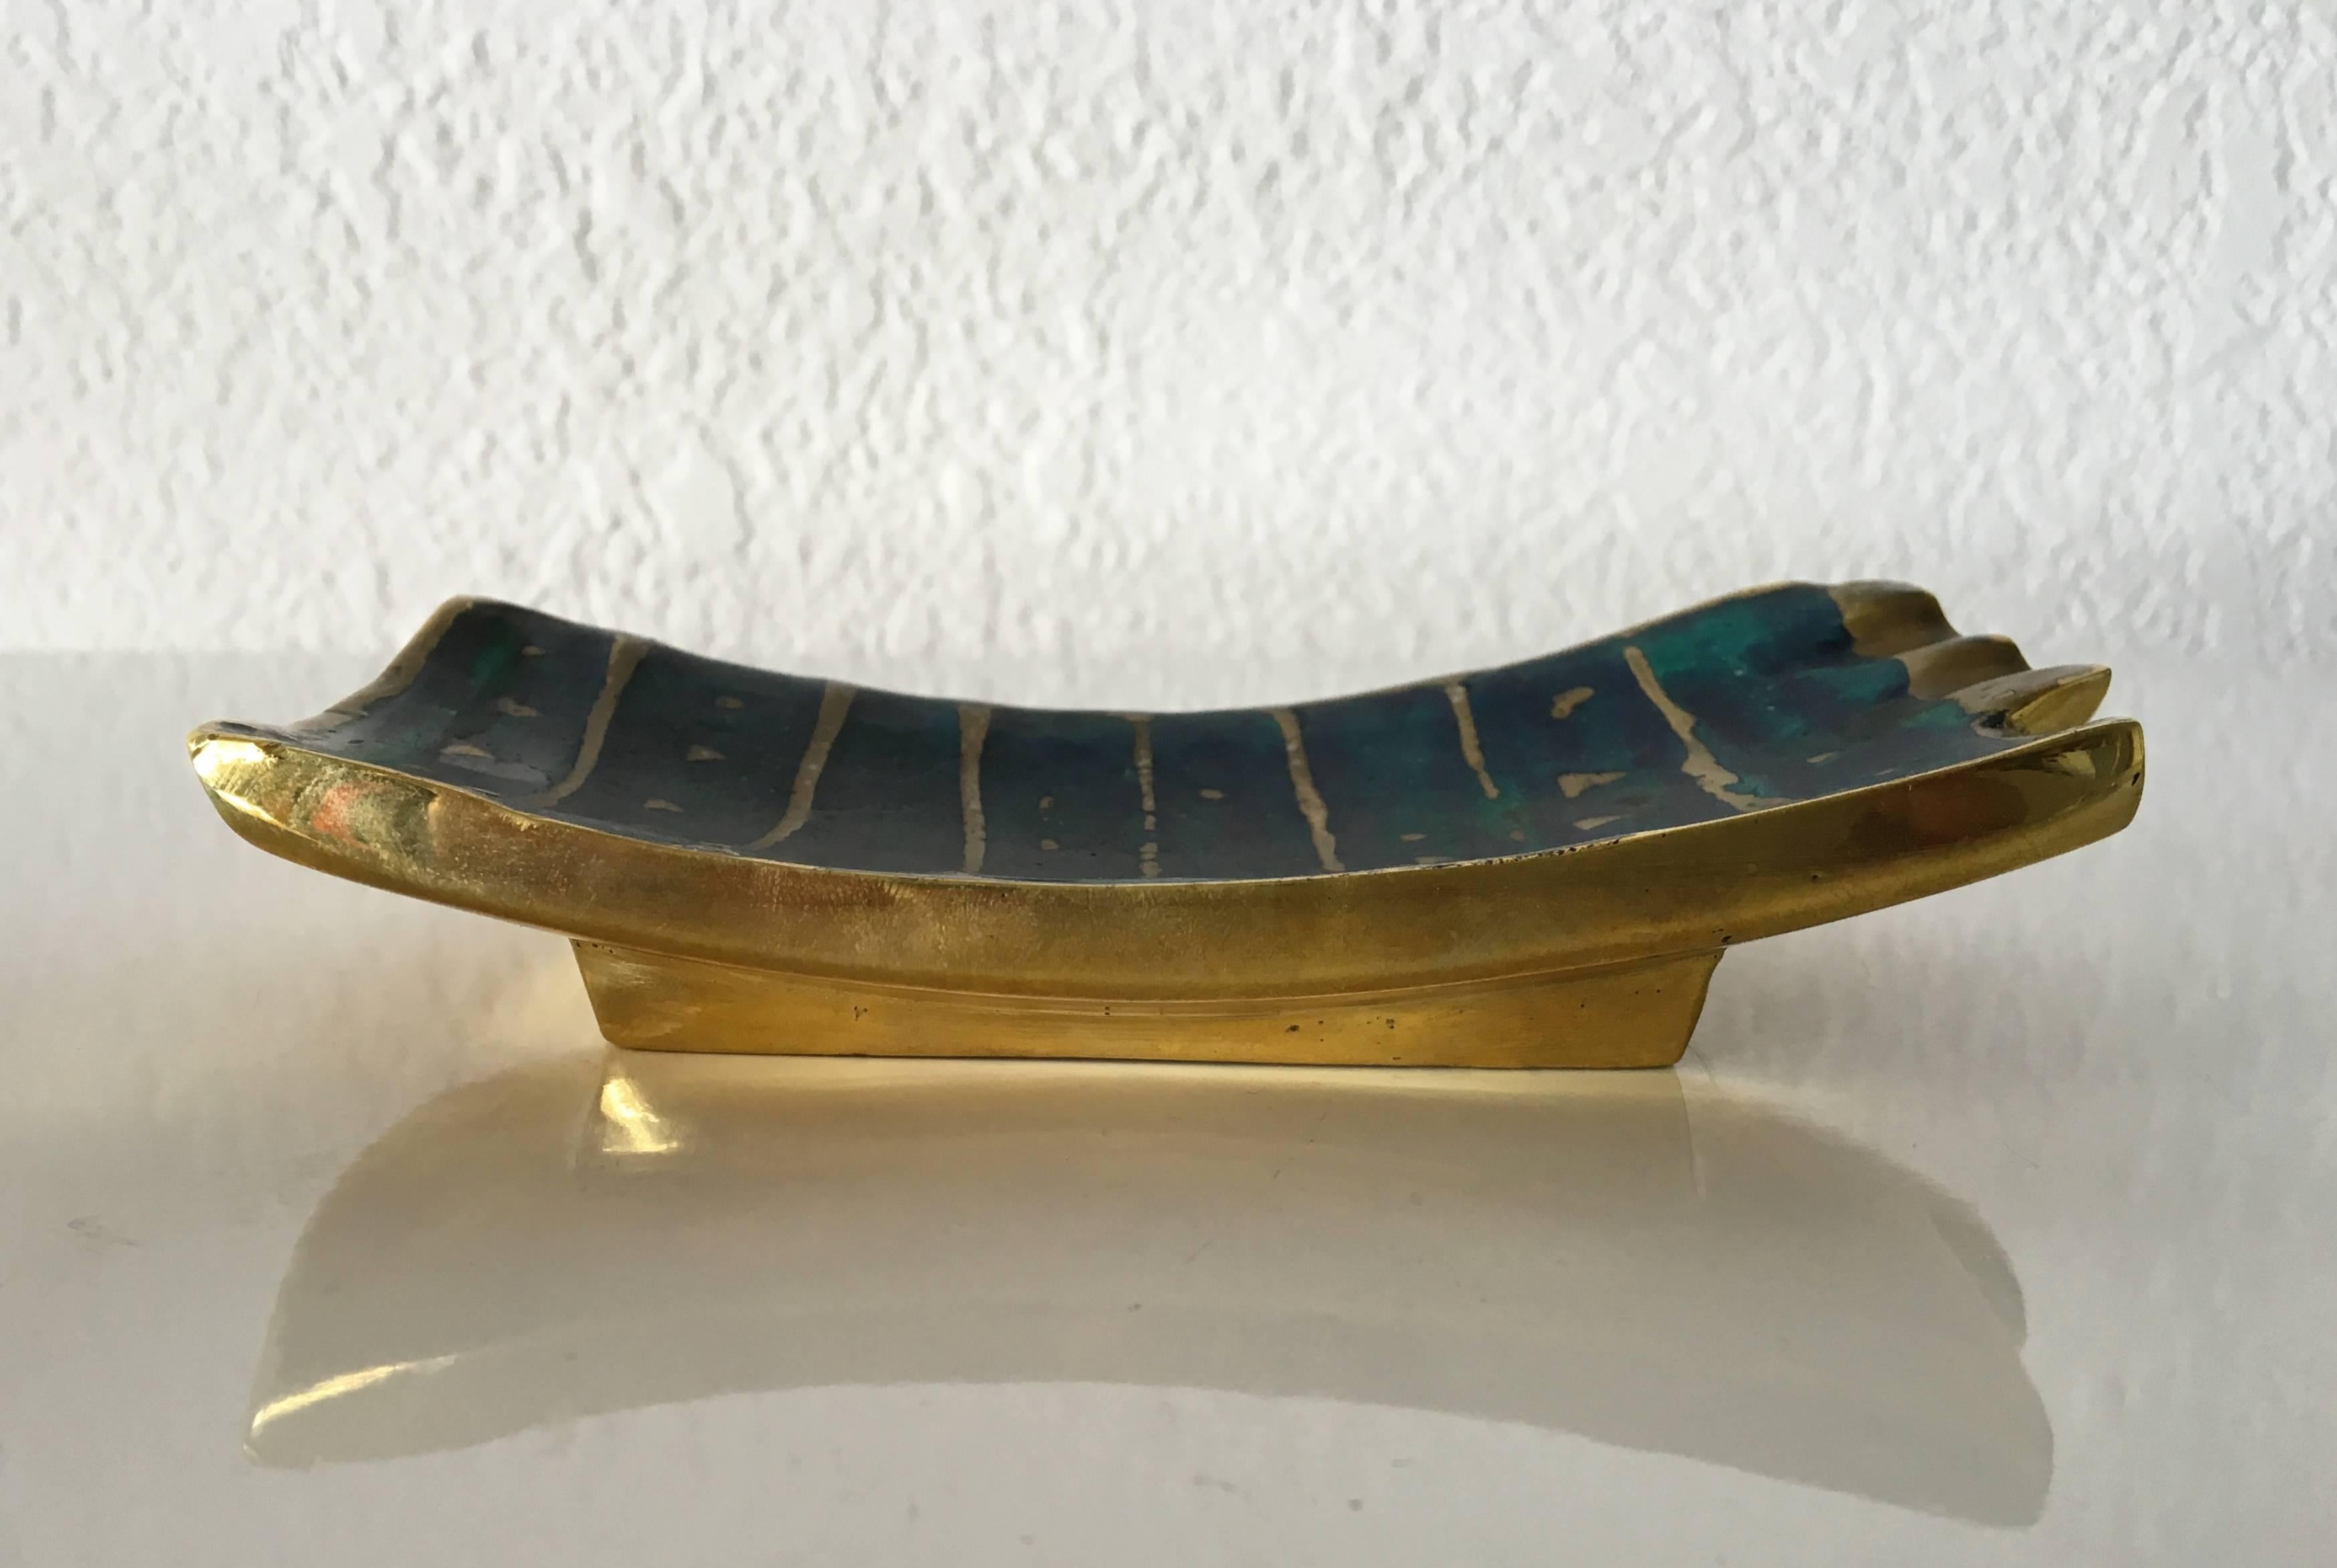 Mexican Brass Ashtray and Small Dish with Ceramic Inlay by Pepe Mendoza, Mexico, 1960s